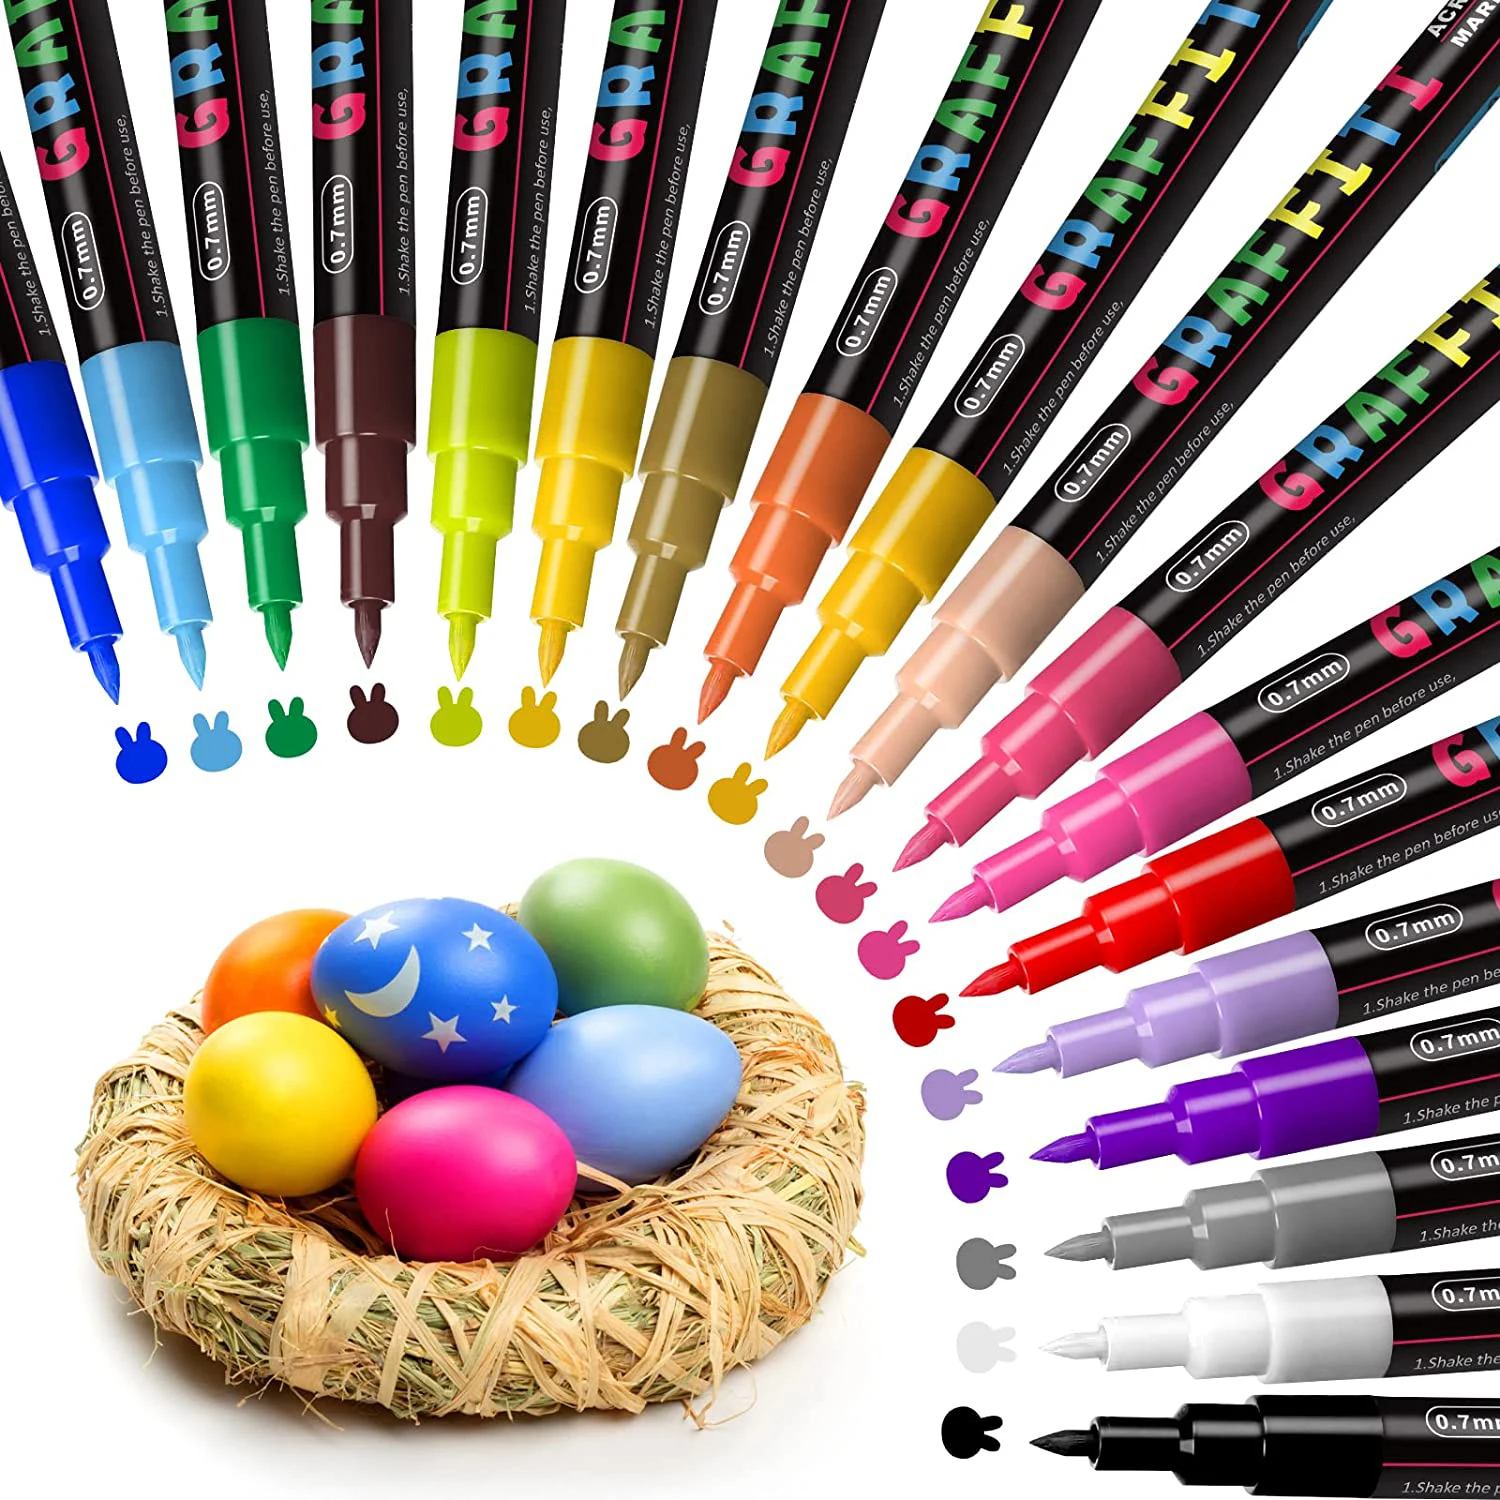 

Acrylic Paint Pens 18 Colors Acrylic Paint Markers 0.7mm Extra Fine Tip Marker Pens Paint Pens for DIY Craft Projects